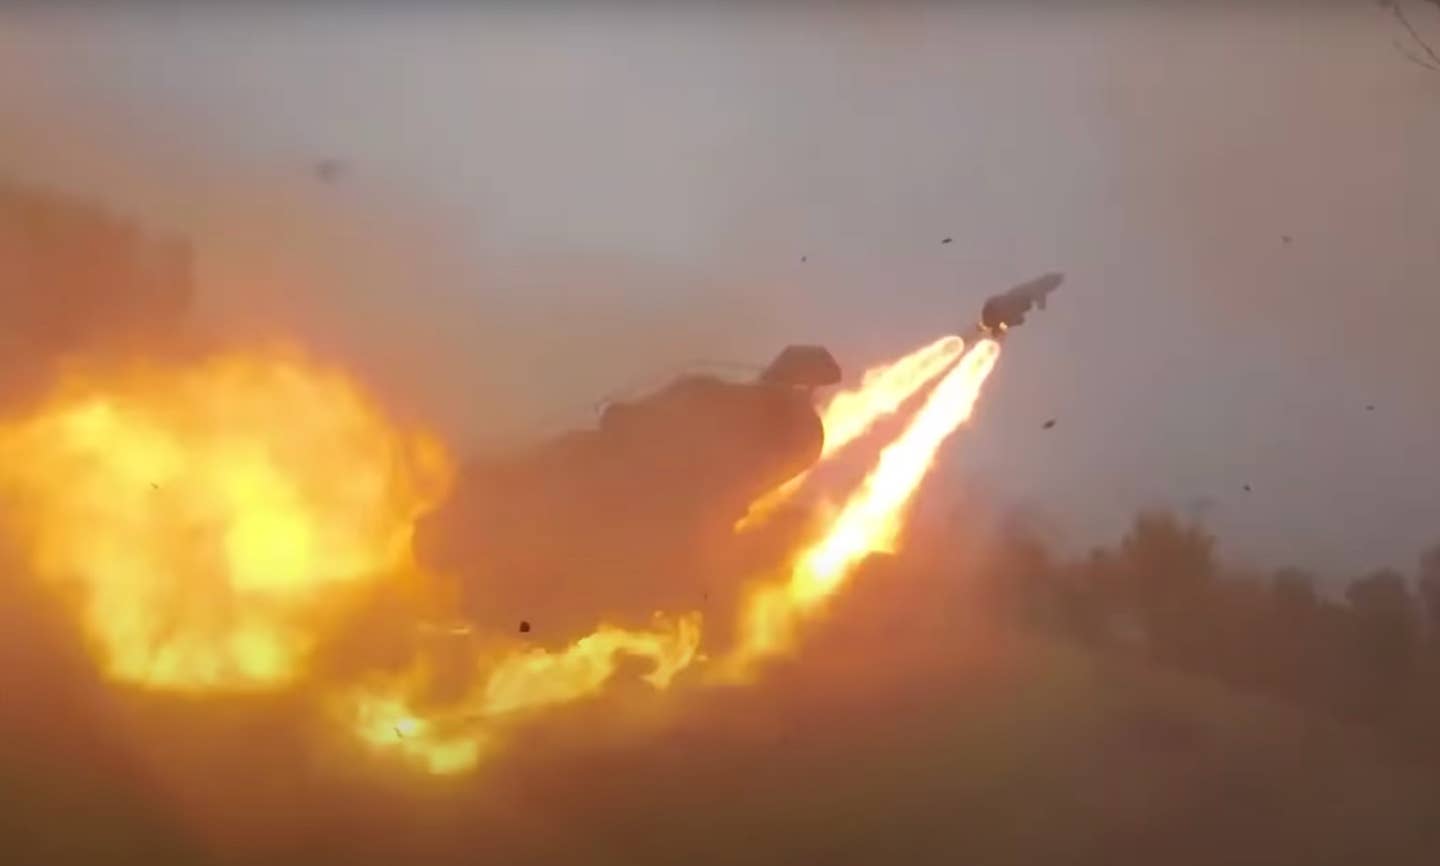 A 3M44 missile climbs out over the Black Sea as the wings deploy, during a live-fire exercise in 2020. RUSSIAN MINISTRY OF DEFENSE SCREENCAP